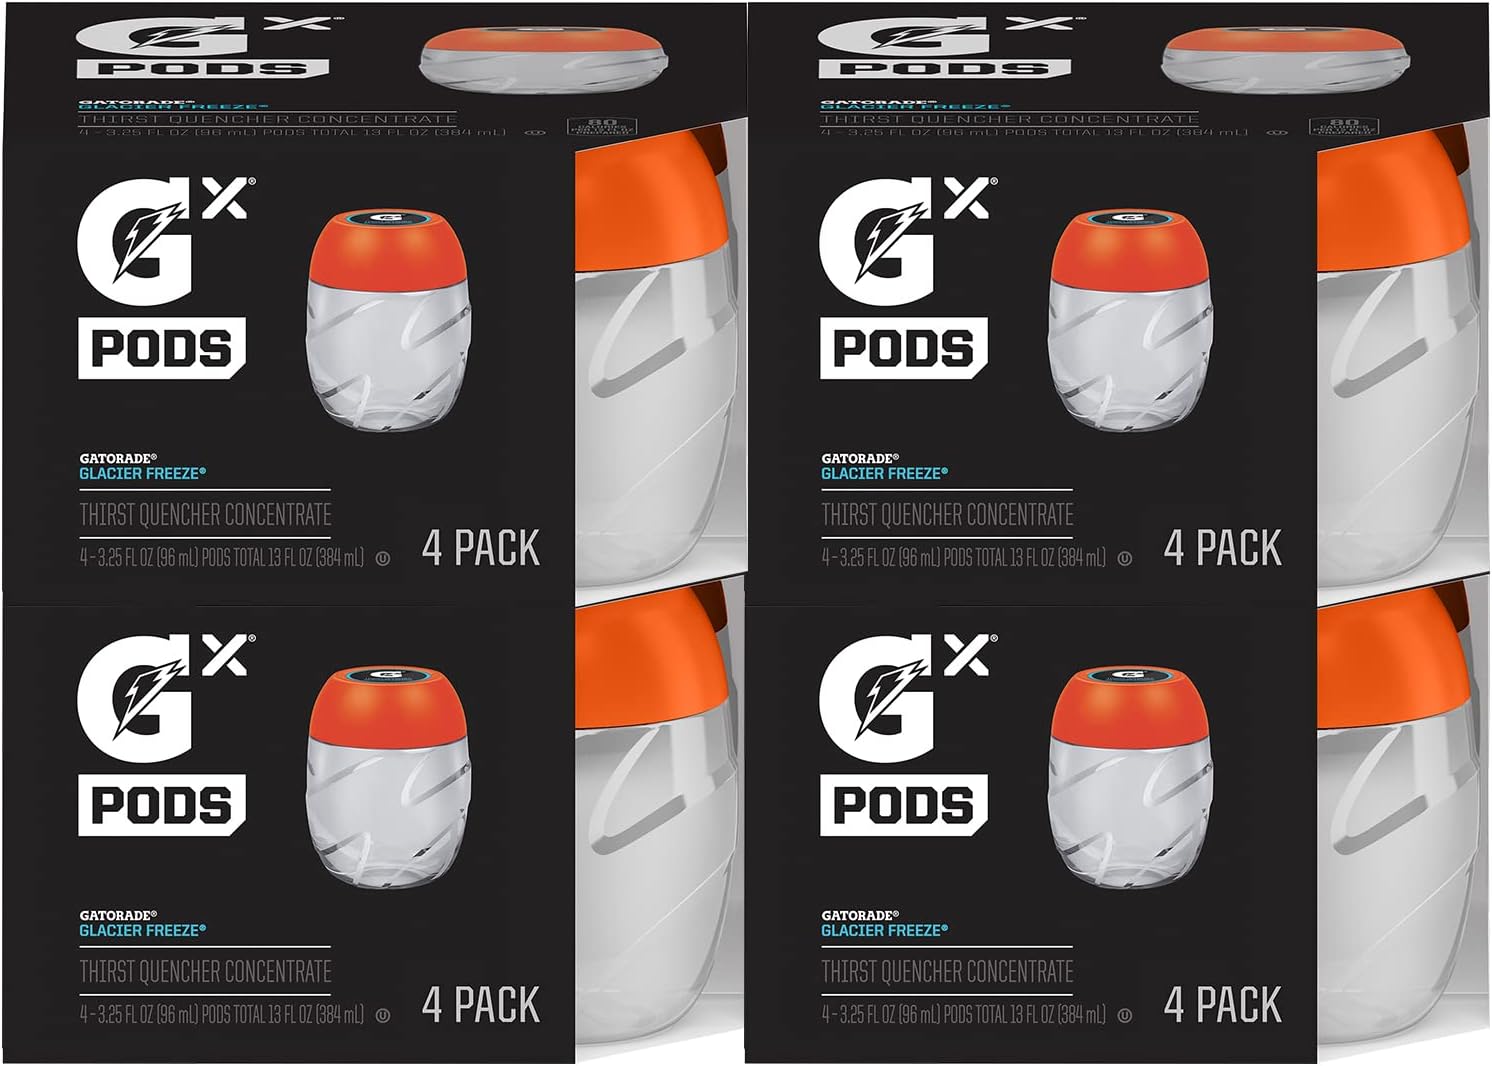 Gatorade Gx Hydration System, Non-Slip Gx Squeeze Bottles & Gx Sports Drink Concentrate Pods, 16 count (4 pack)